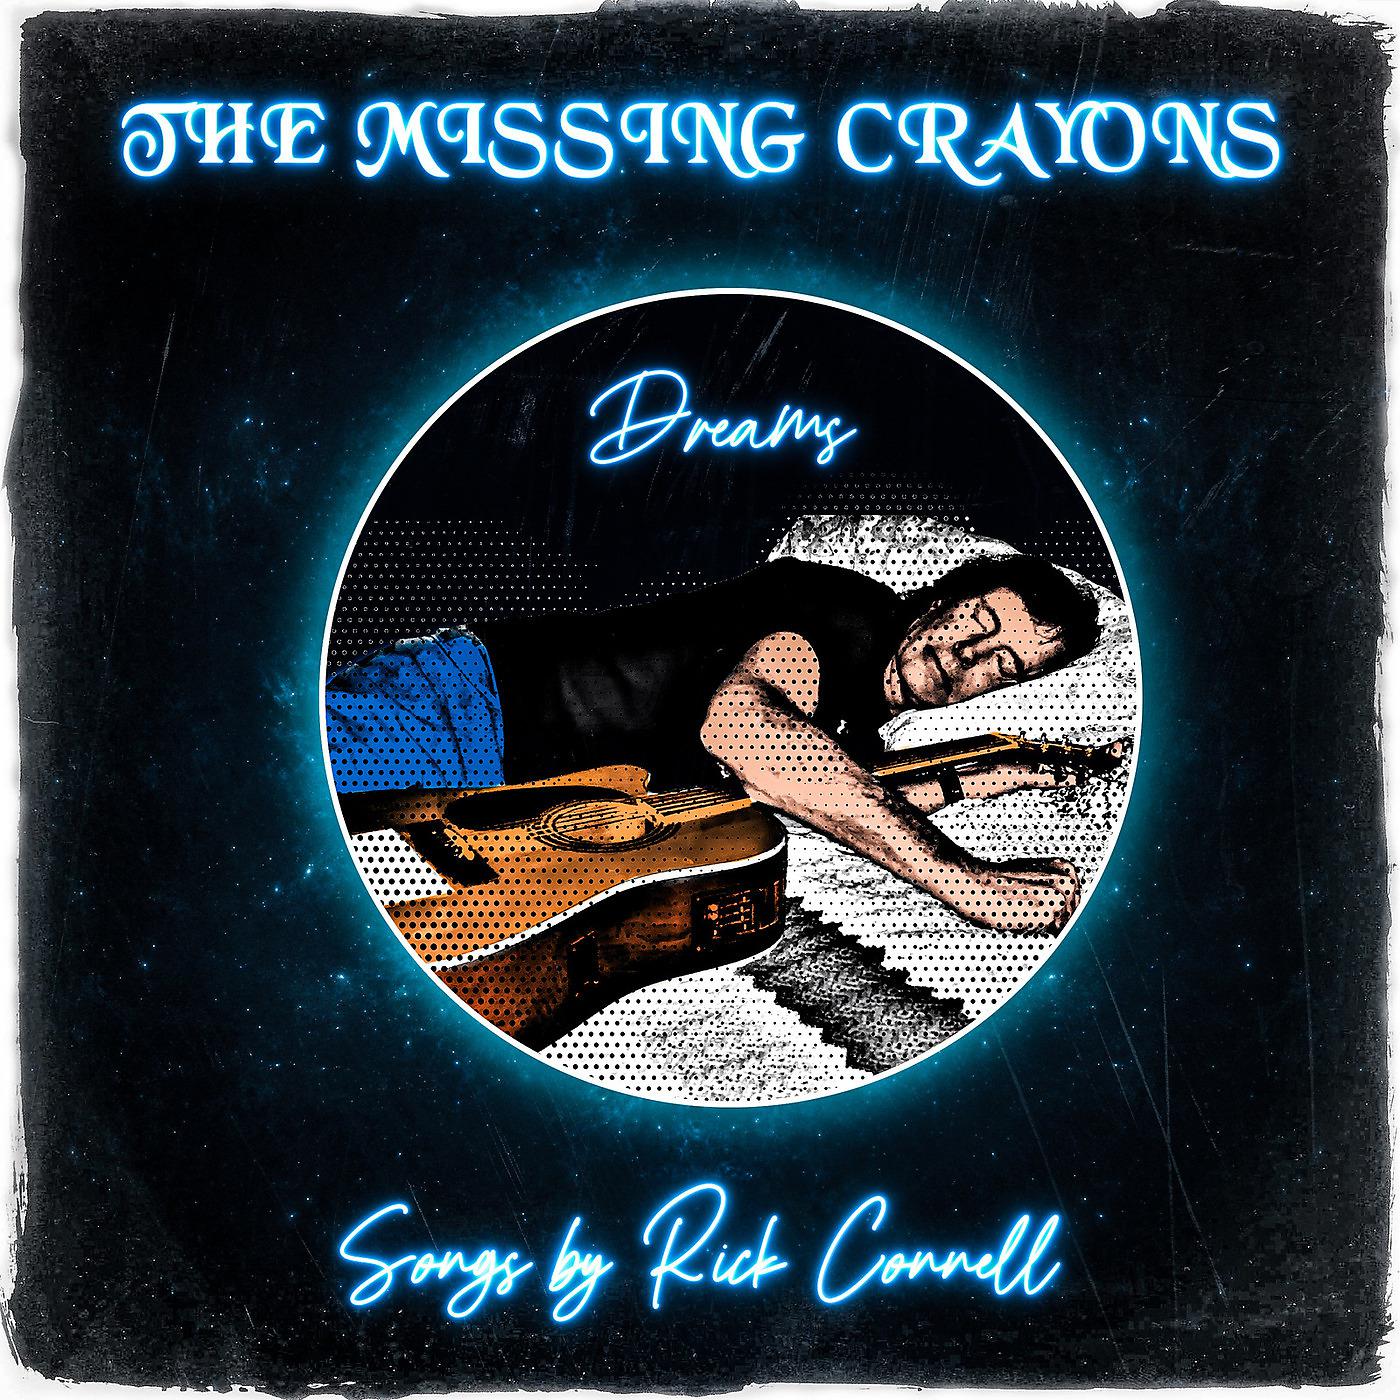 Постер альбома The Missing Crayons Dreams Songs by Rick Connell